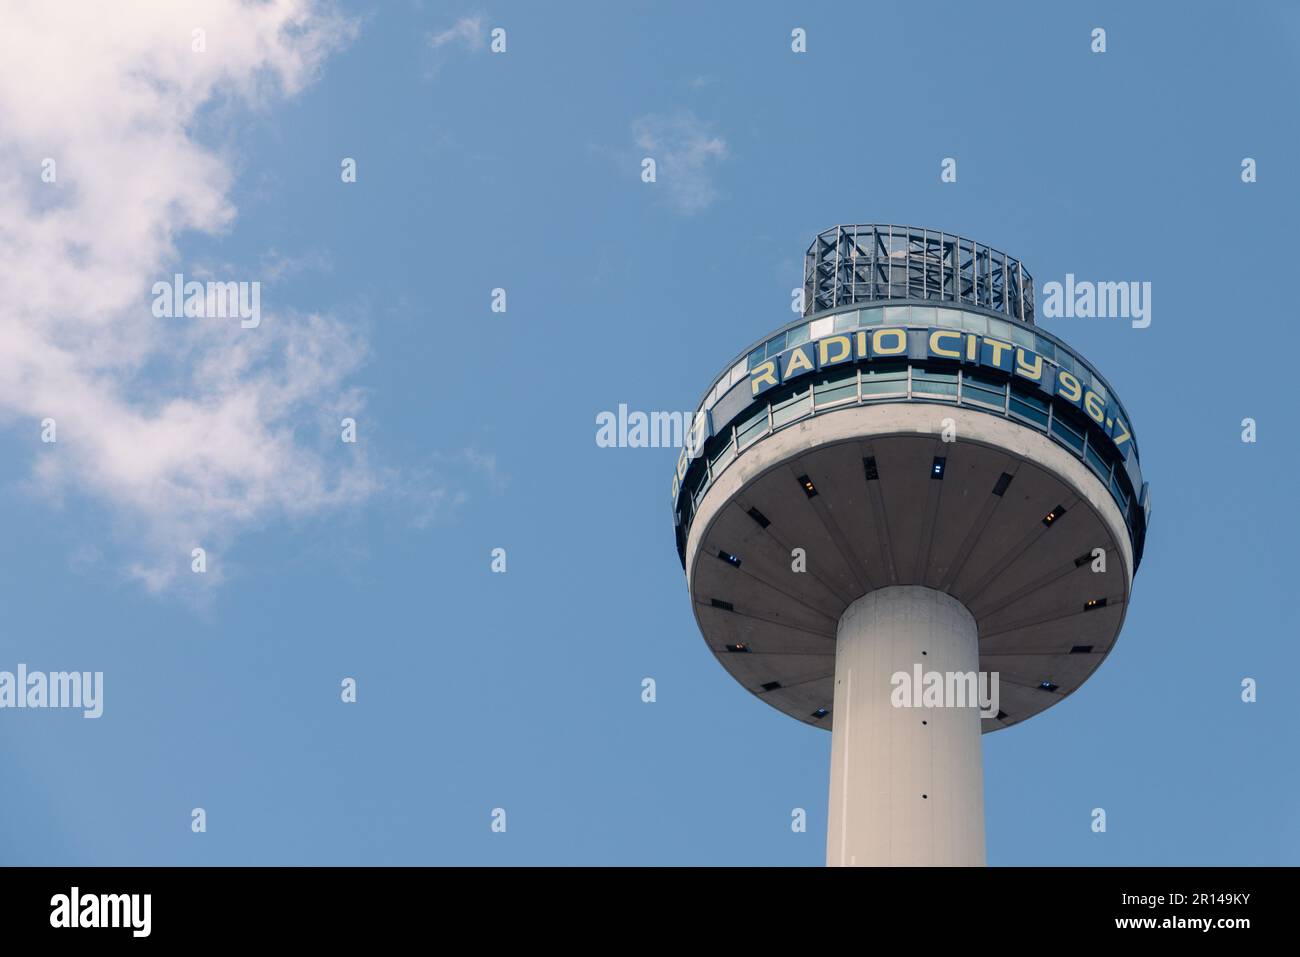 Radio City Tower, conosciuta anche come St Johns Beacon Viewing Gallery, a Liverpool, Inghilterra. Credit: Notizie SMP / Alamy Live News Foto Stock